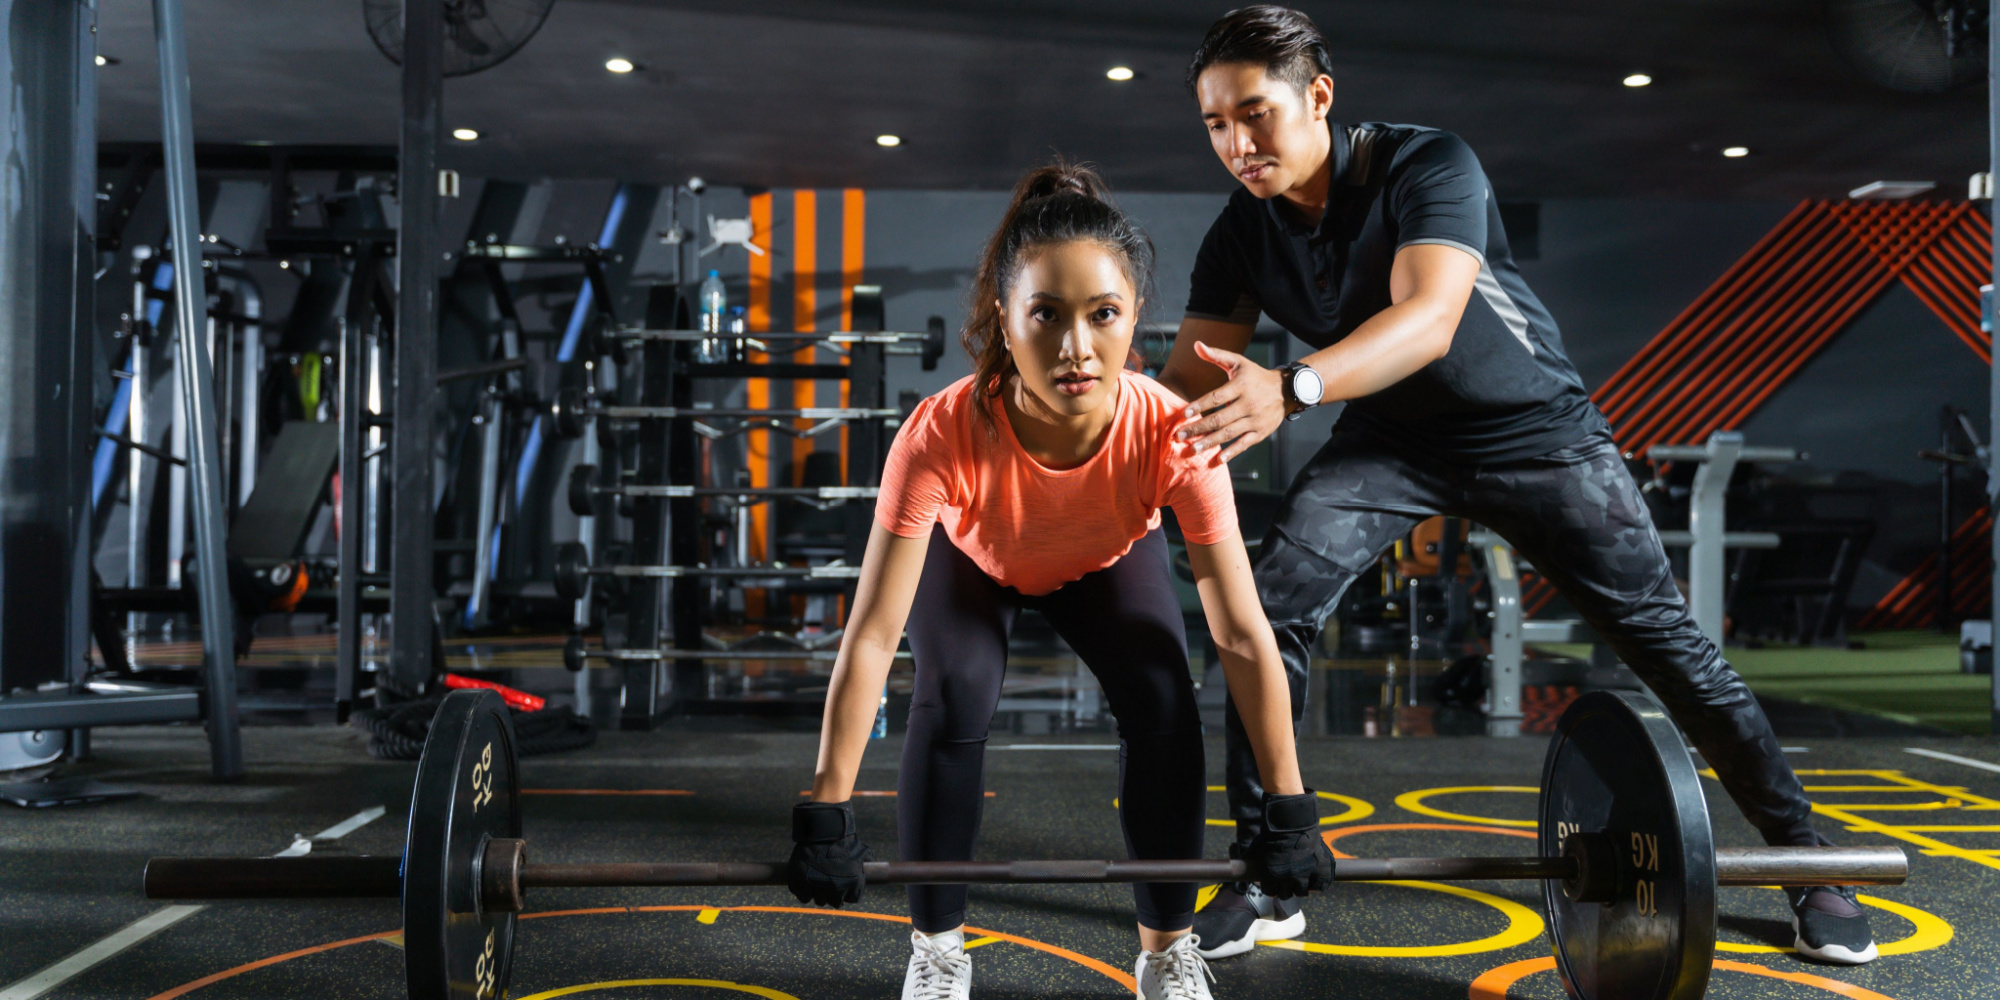 5 Simple Tips to Become a Successful Personal Trainer